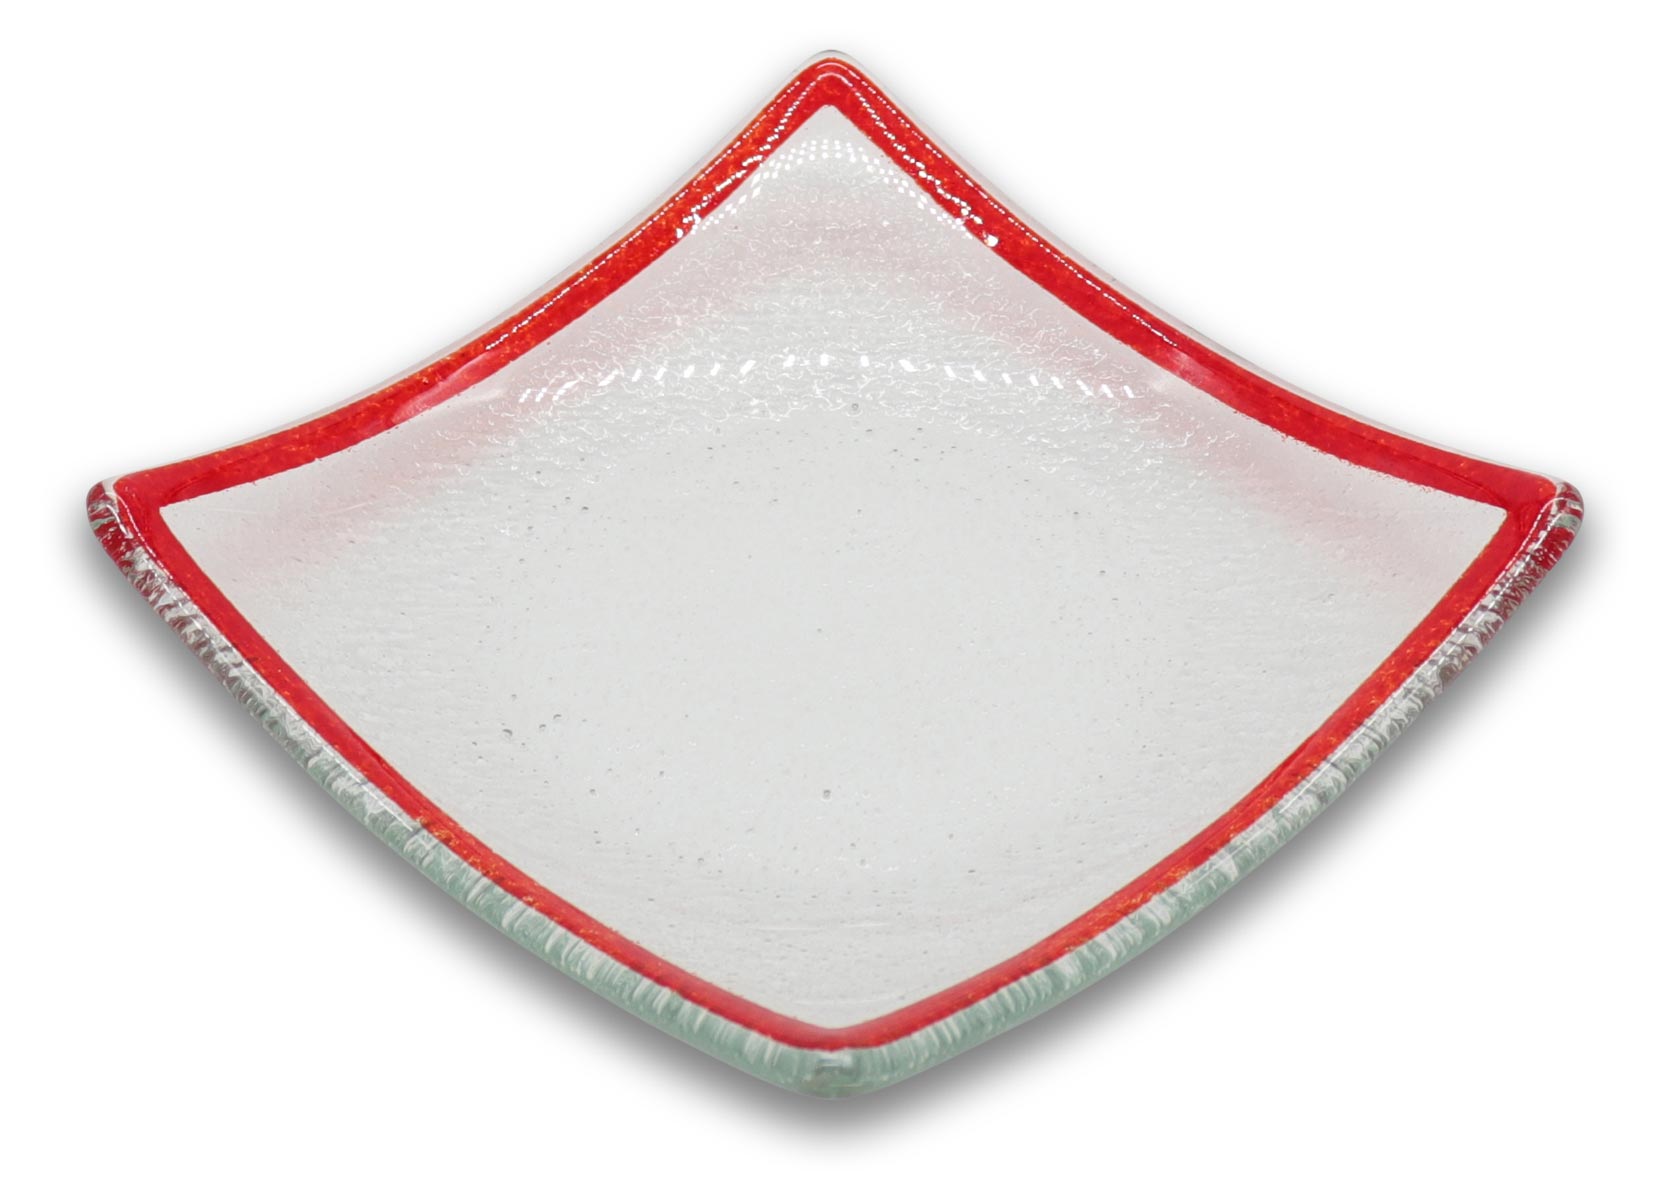 Vaulted glass plate with border bordeaux, 